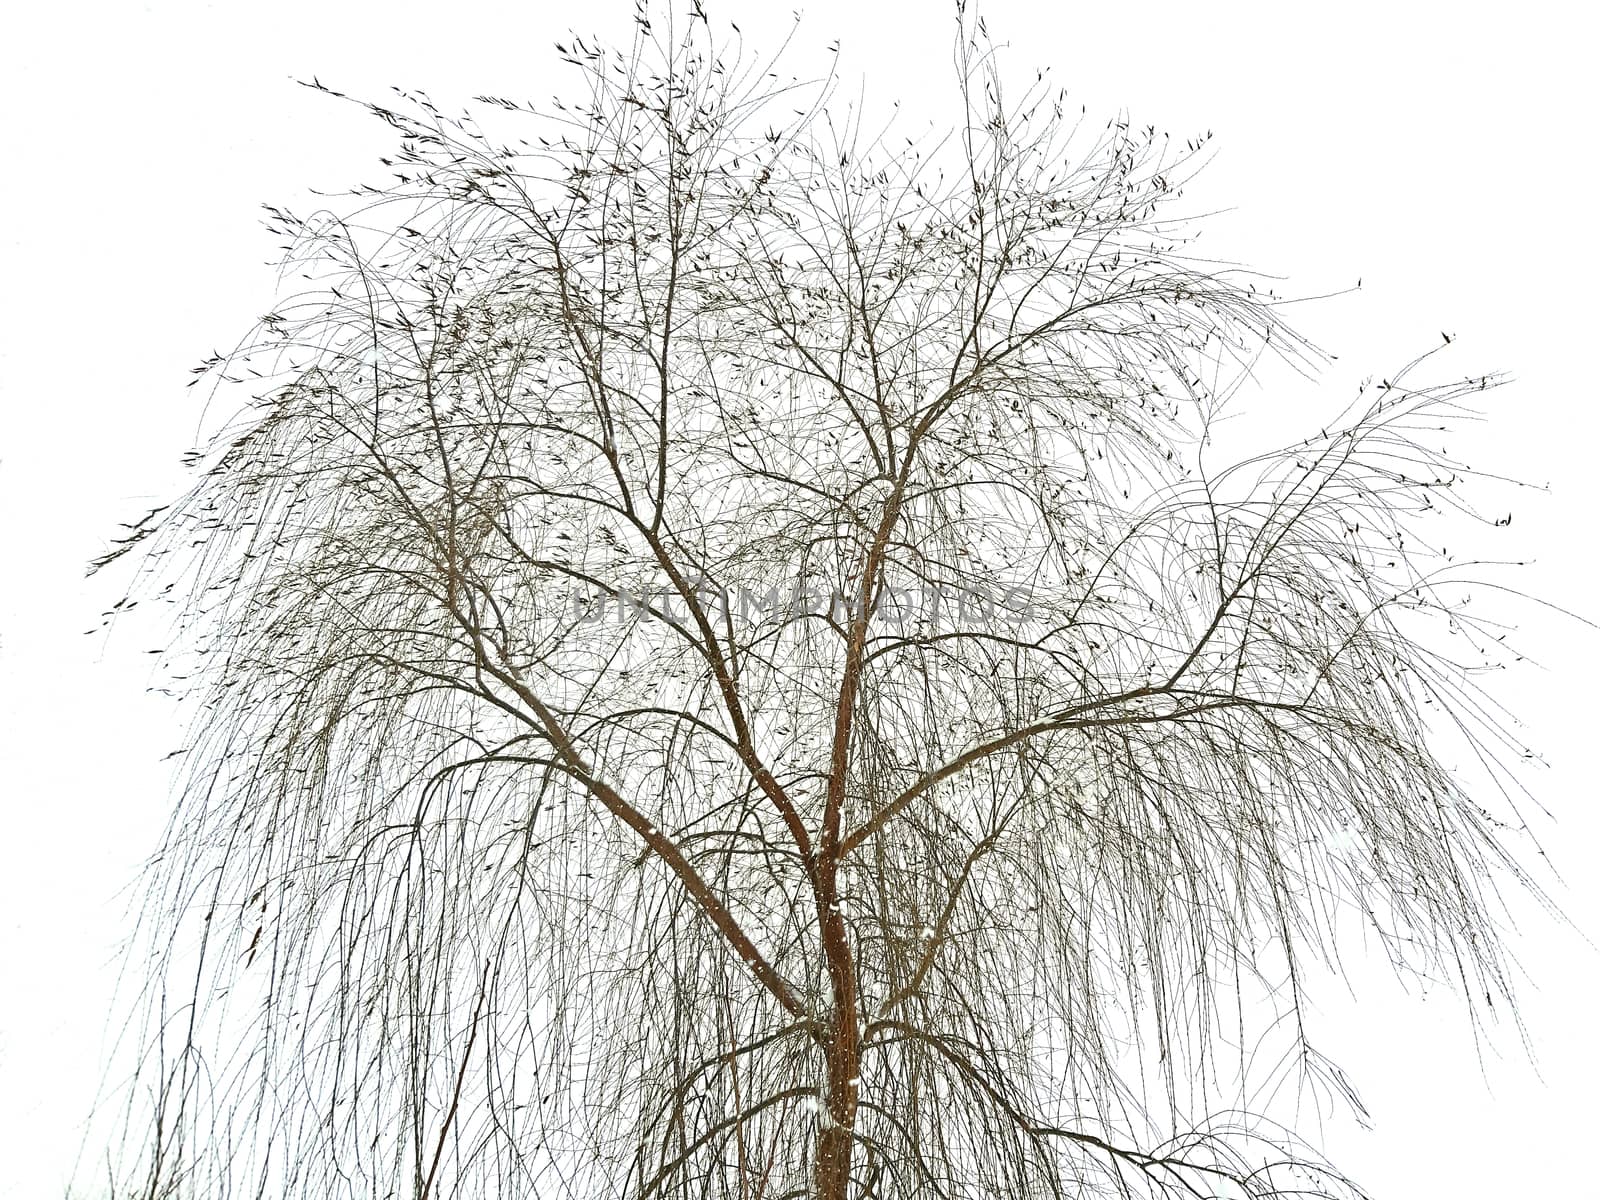 Willow tree on snowy white sky in winter.